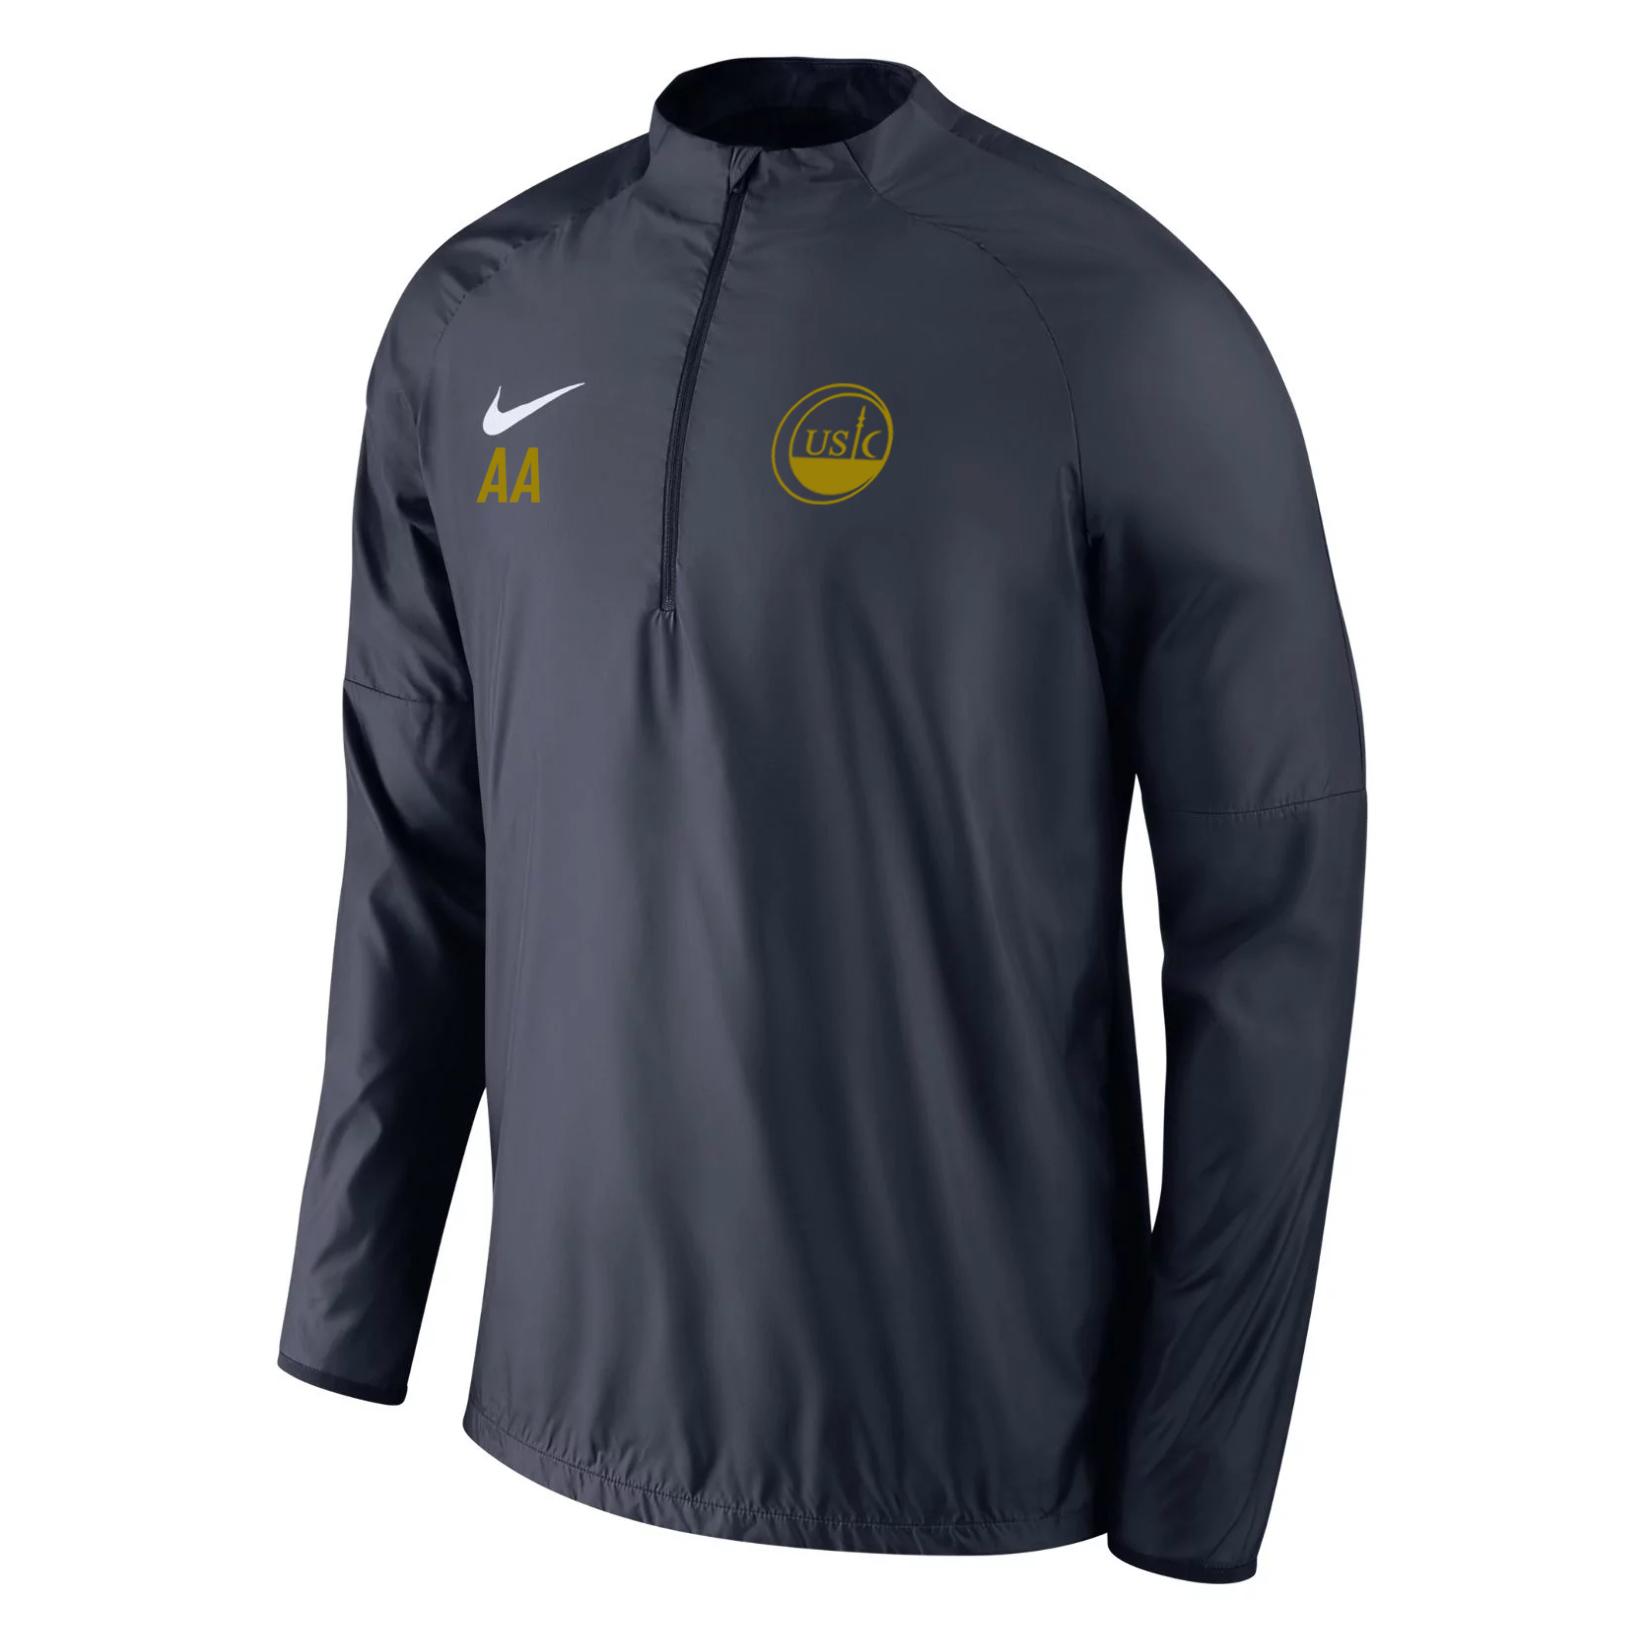 Nike Academy 18 Shield Drill Top